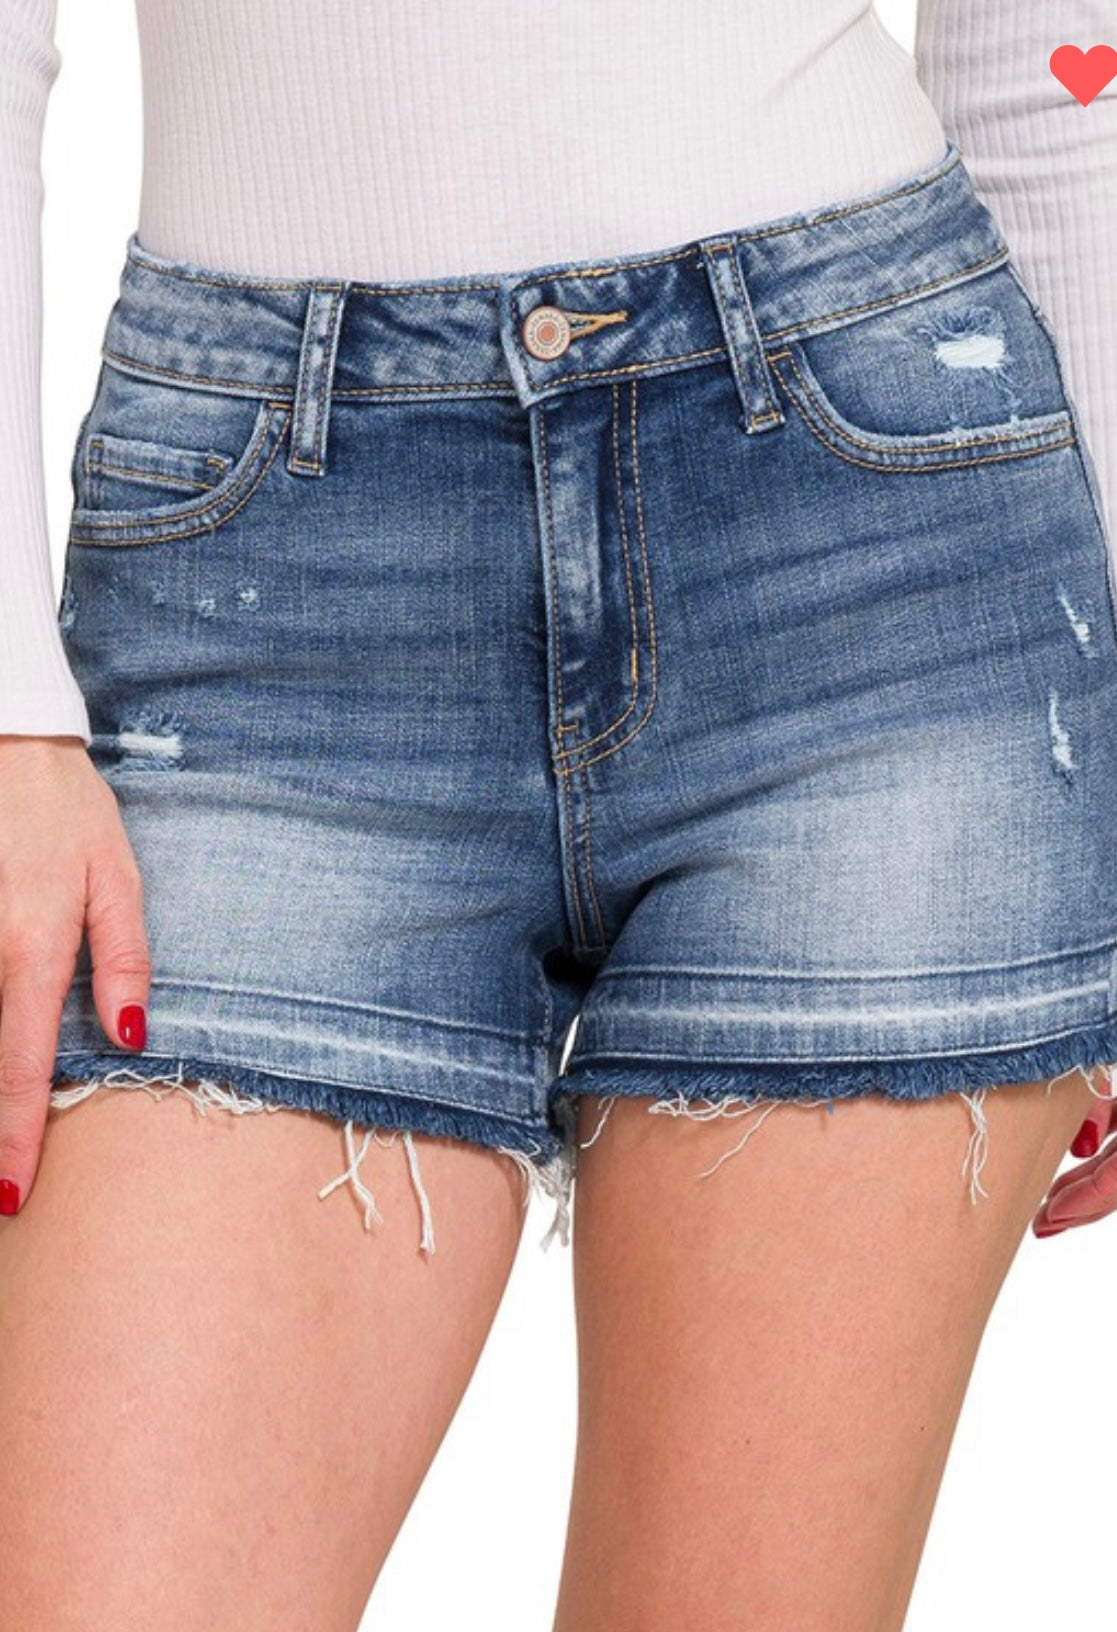 The Perfect Pair of Shorts